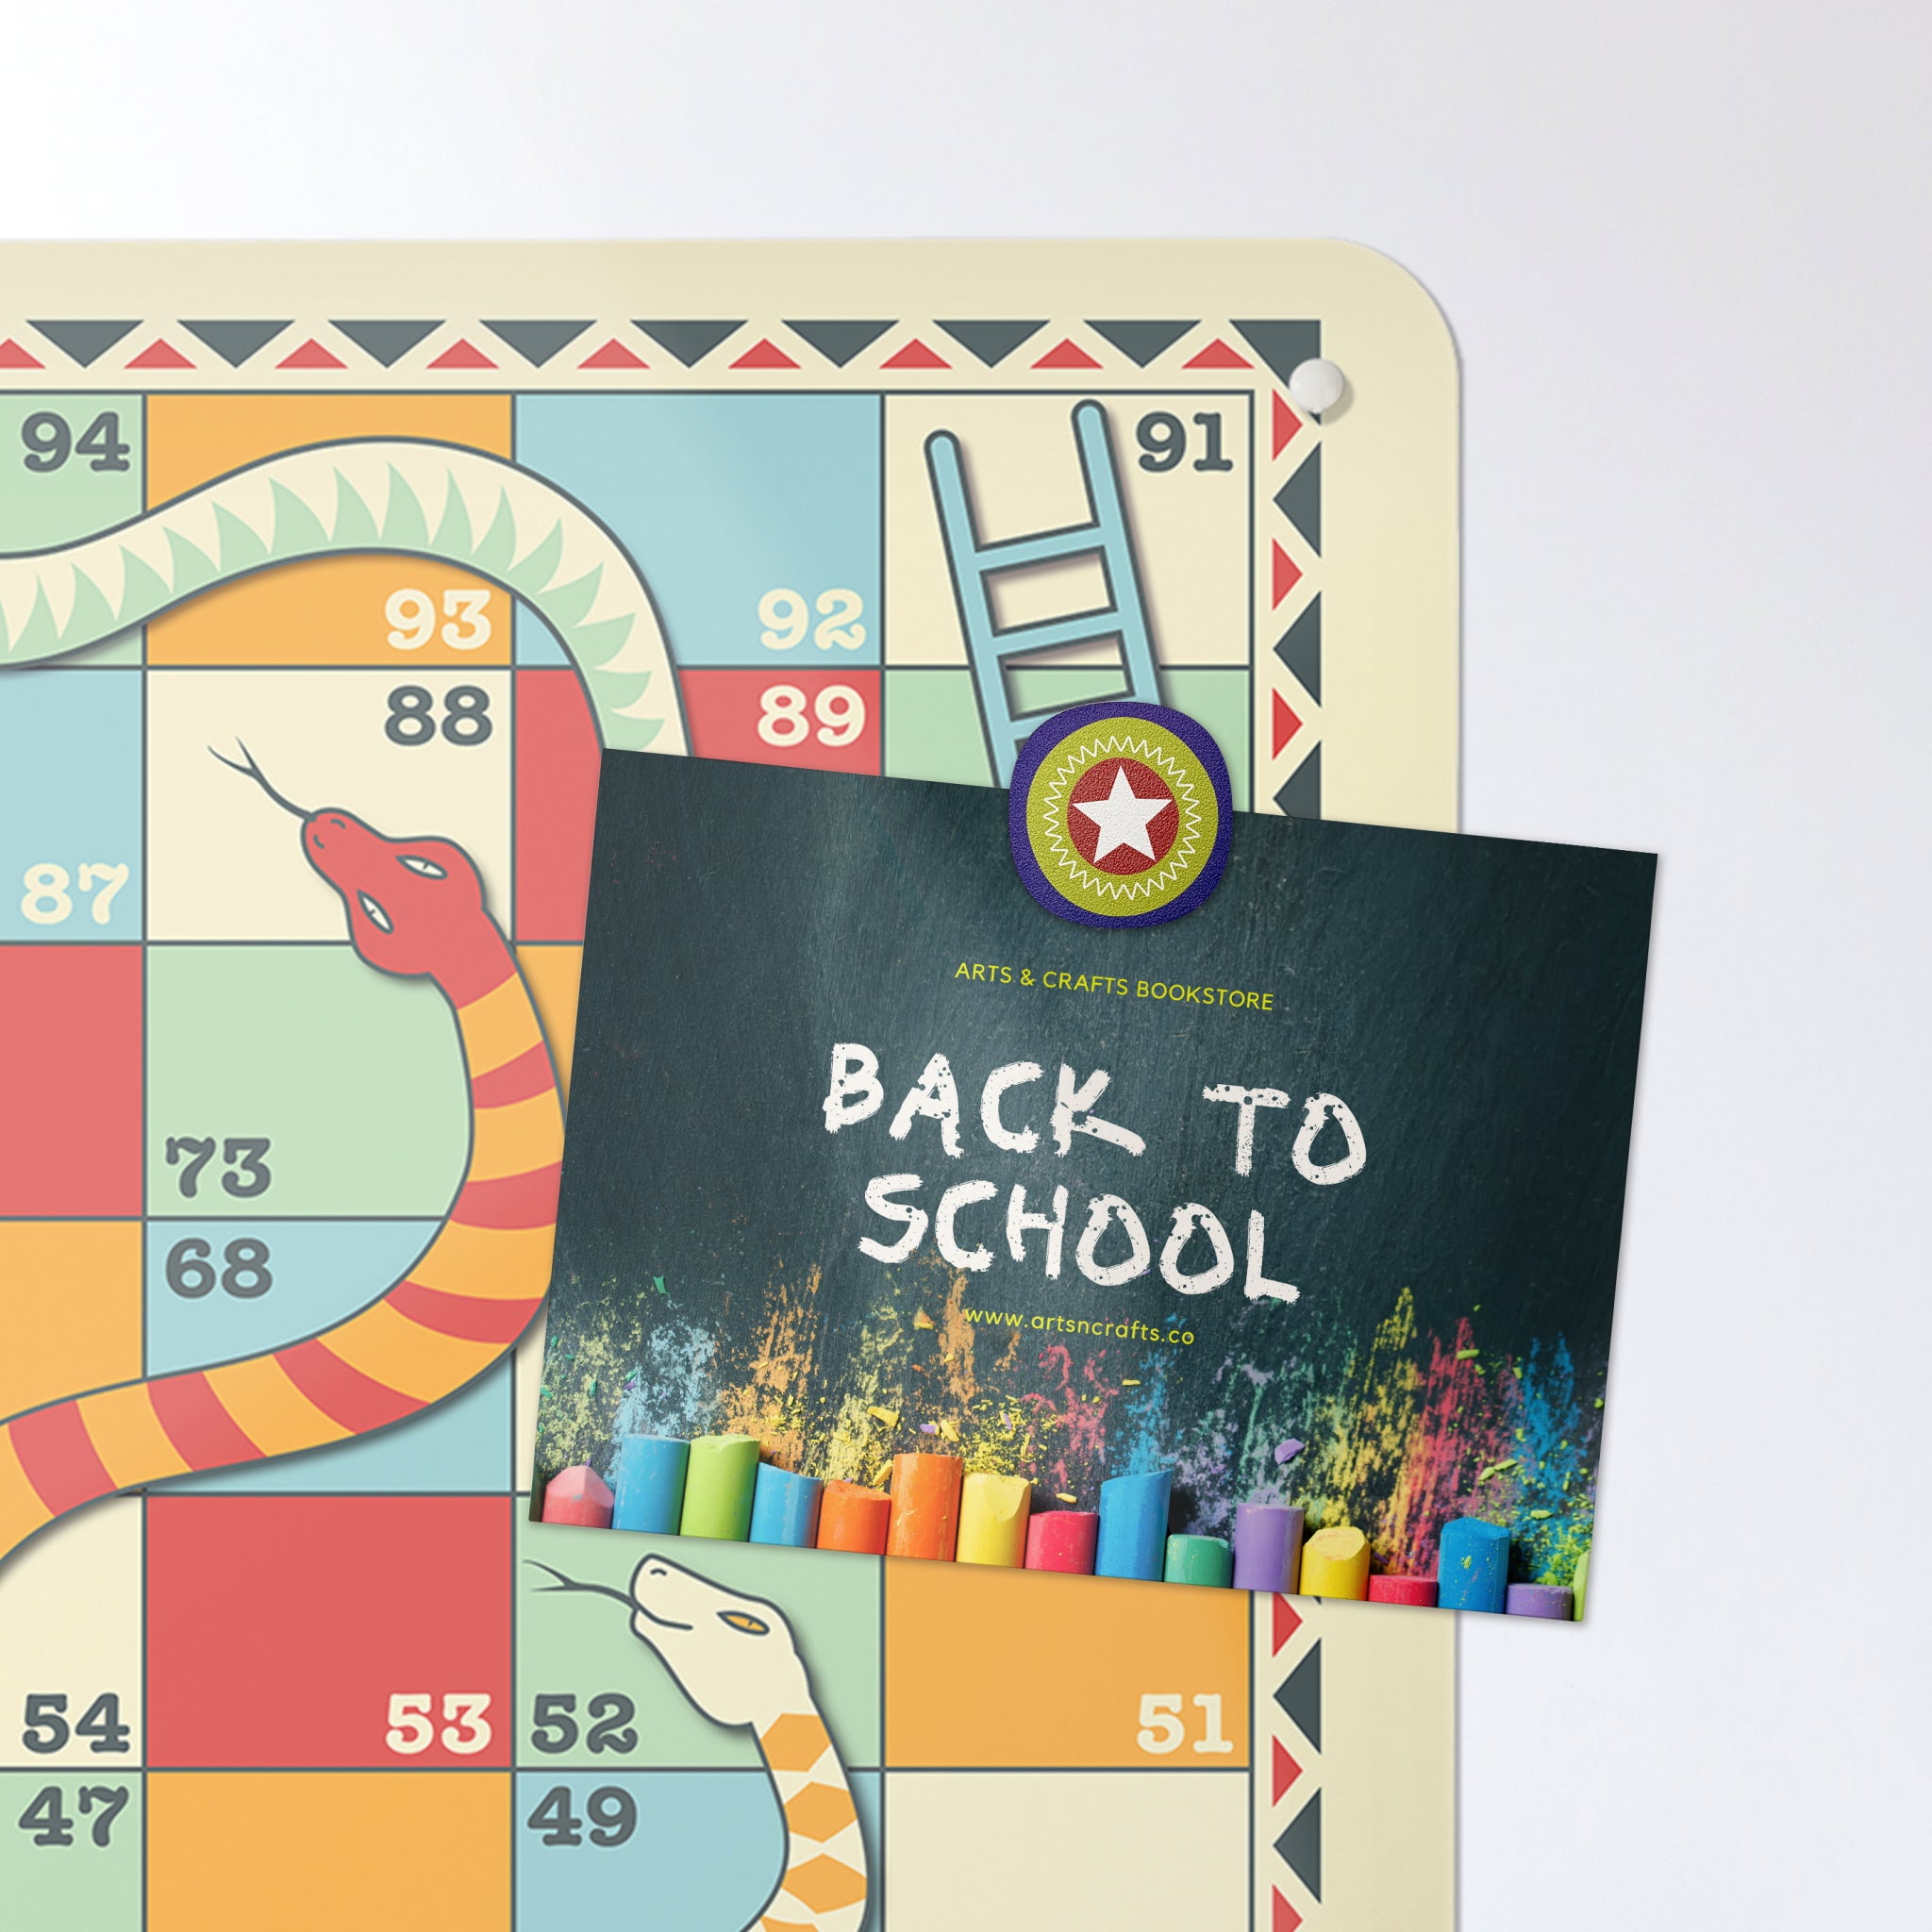 A postcard on a snakes and ladders game magnetic board or metal wall art panel